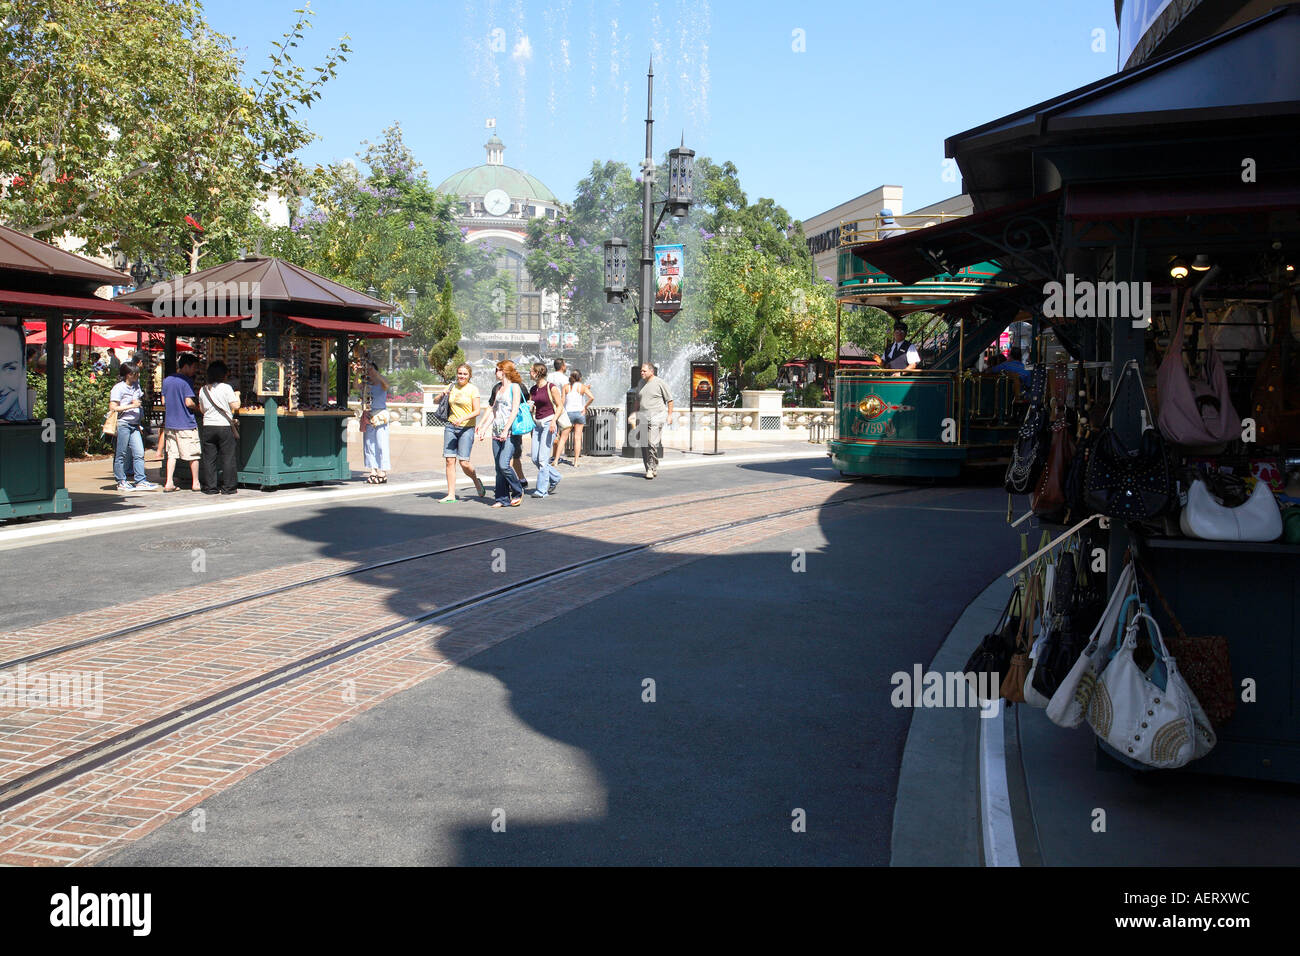 The Grove shopping area near the Farmers market downtown Los Angeles, United States of America Stock Photo